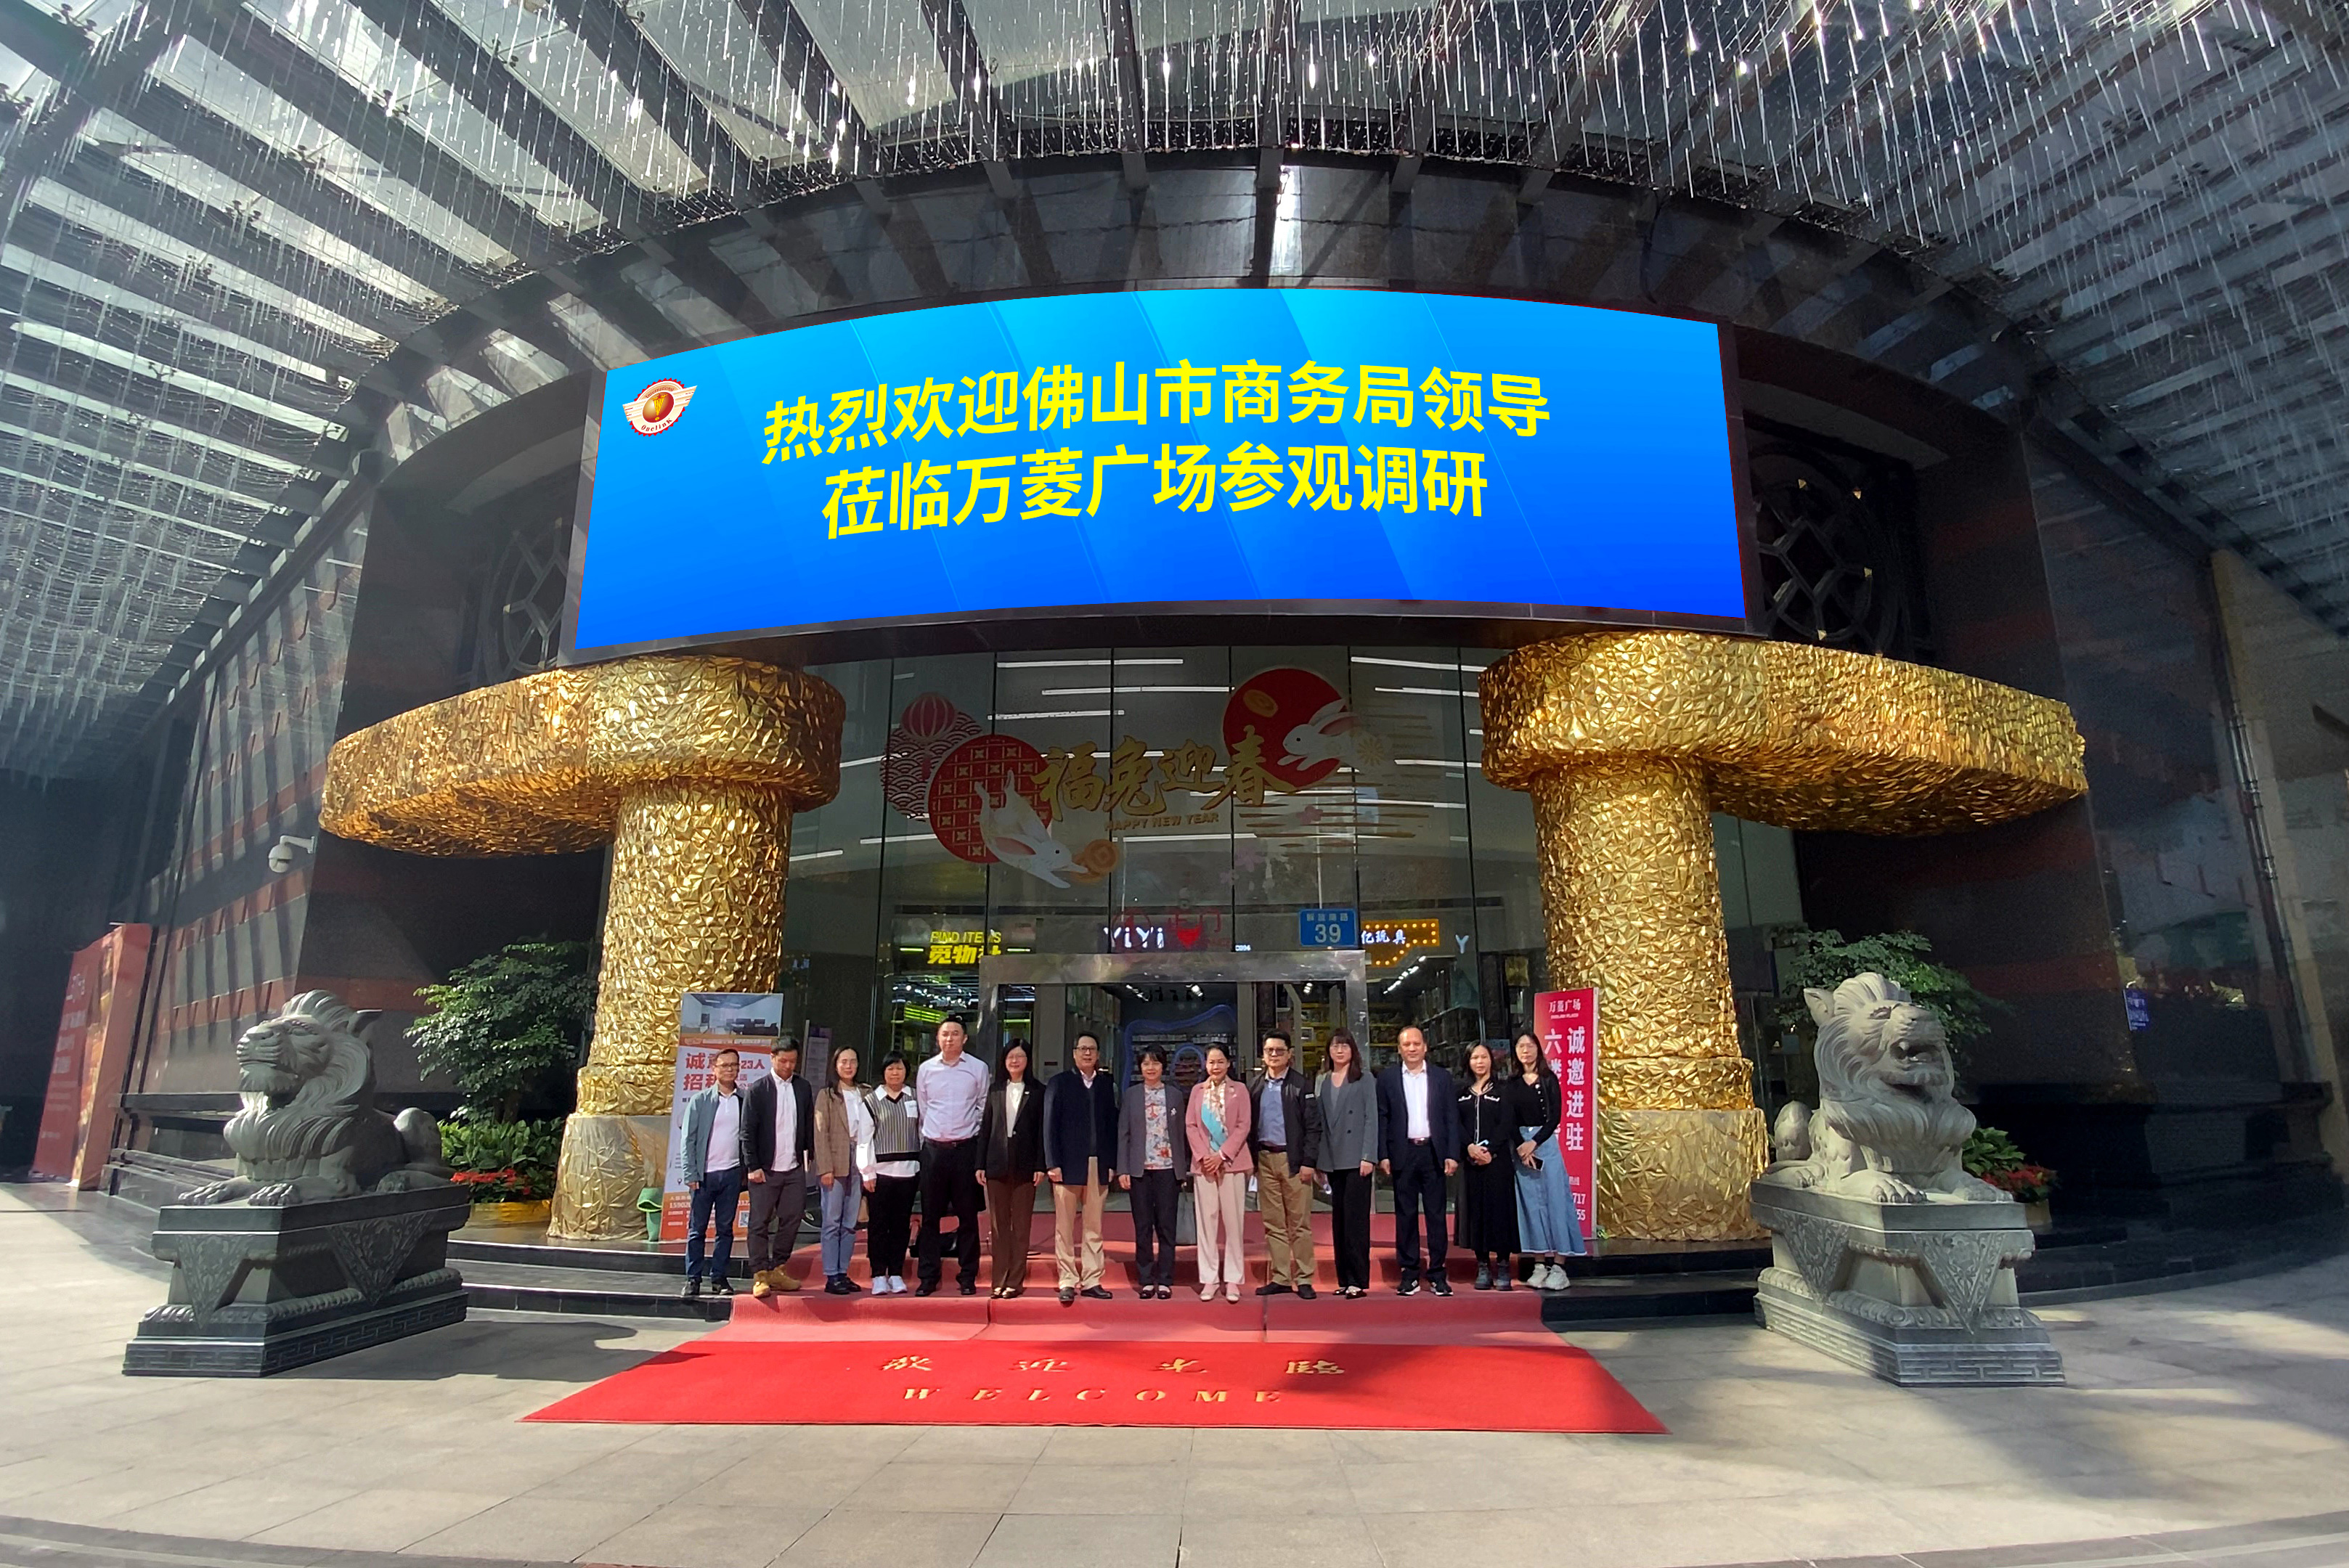 Leaders of Foshan Municipal Bureau of Commerce Visited Wanling Square for Research and Inspection